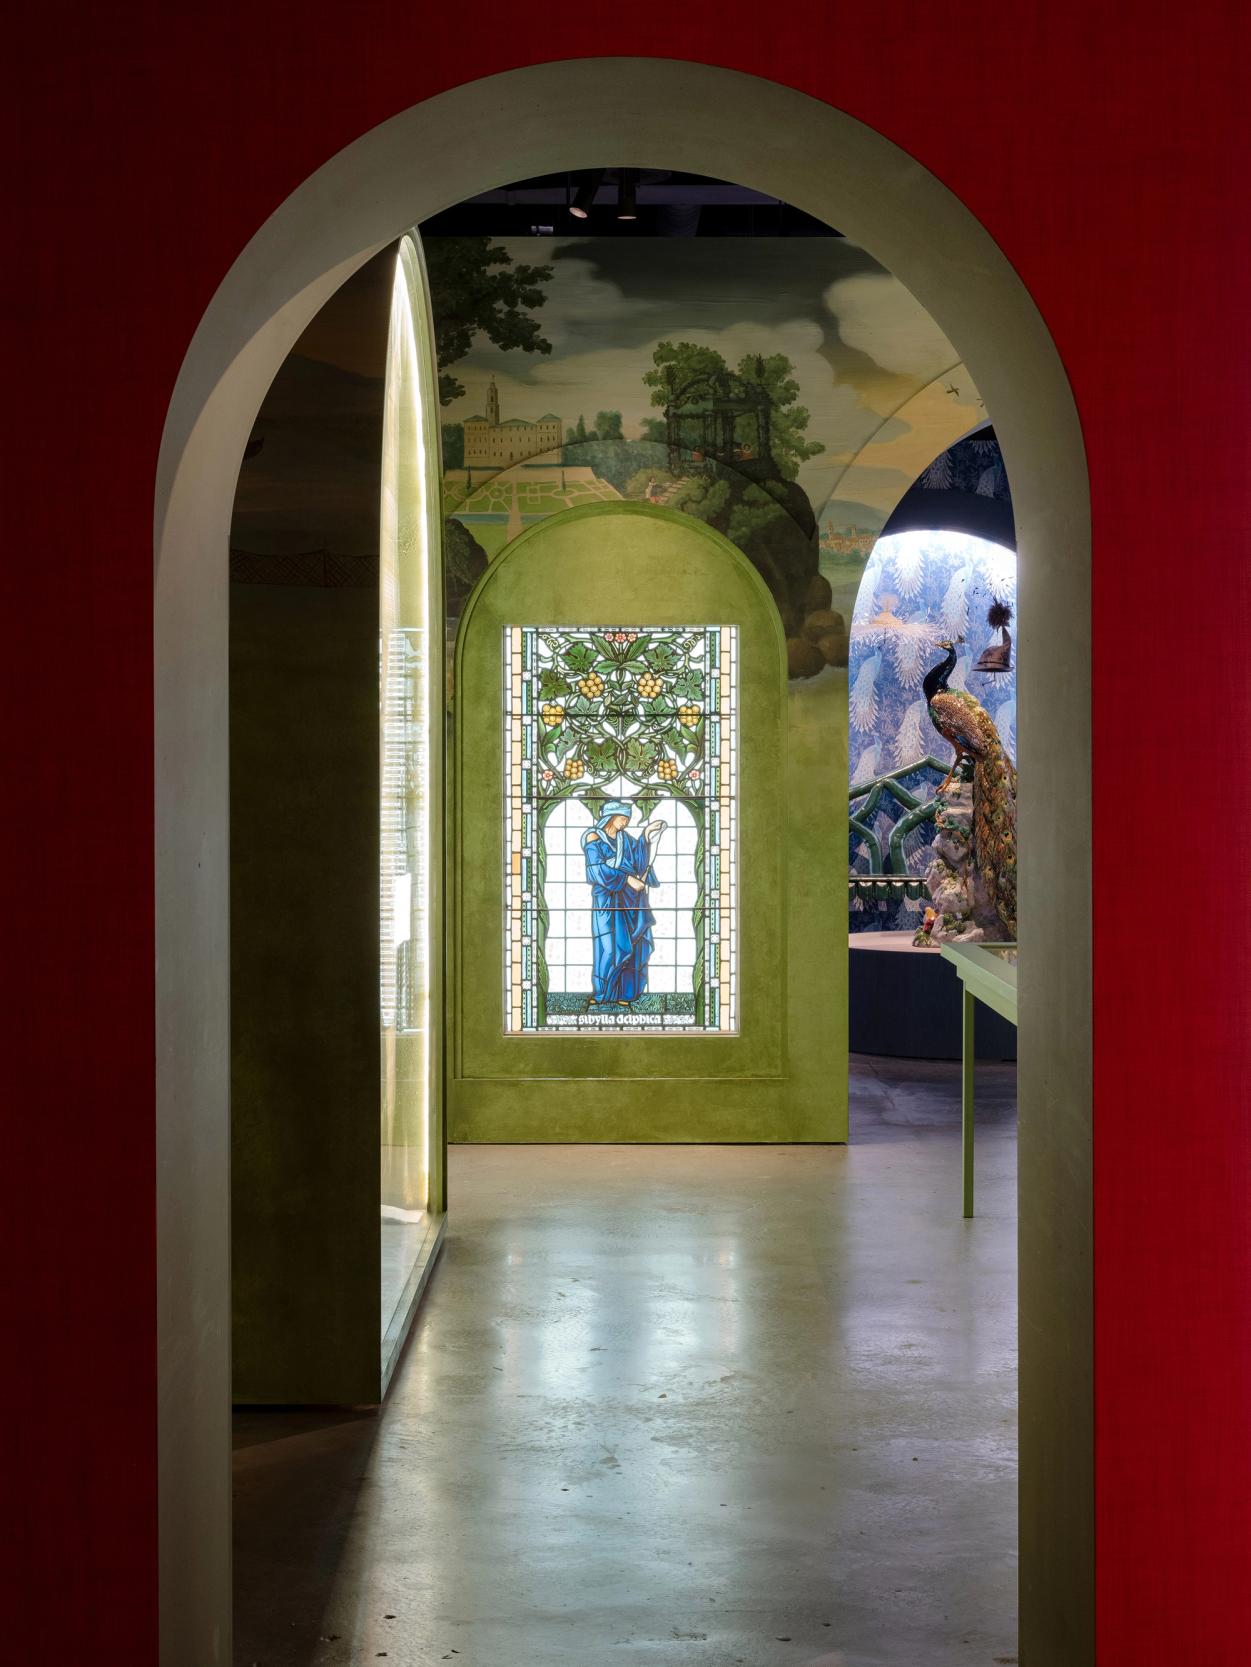 Arches in exhibition, from room to room.